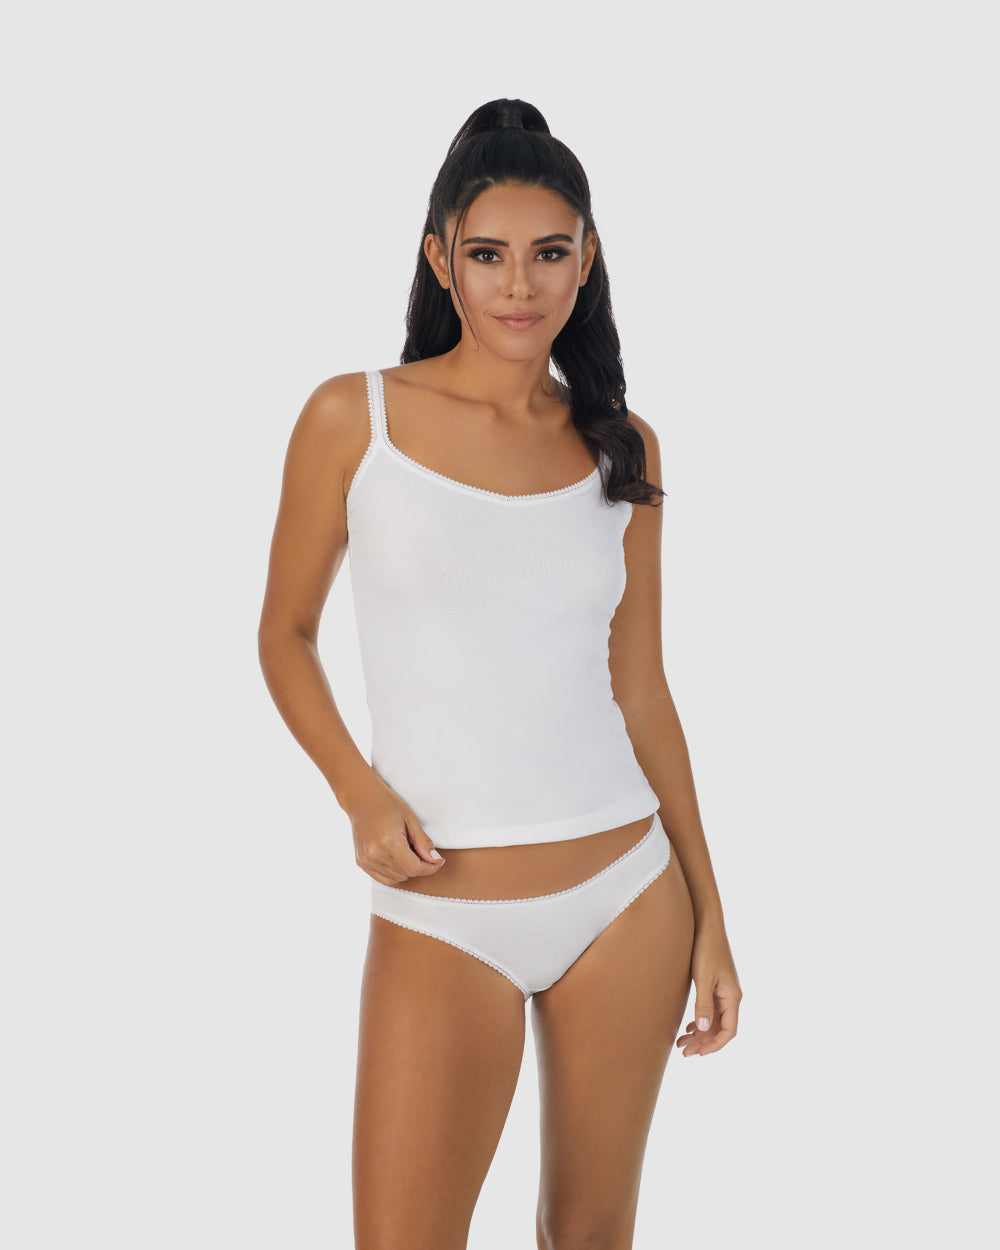 A lady wearing white Cabana Cotton Reversible Cami